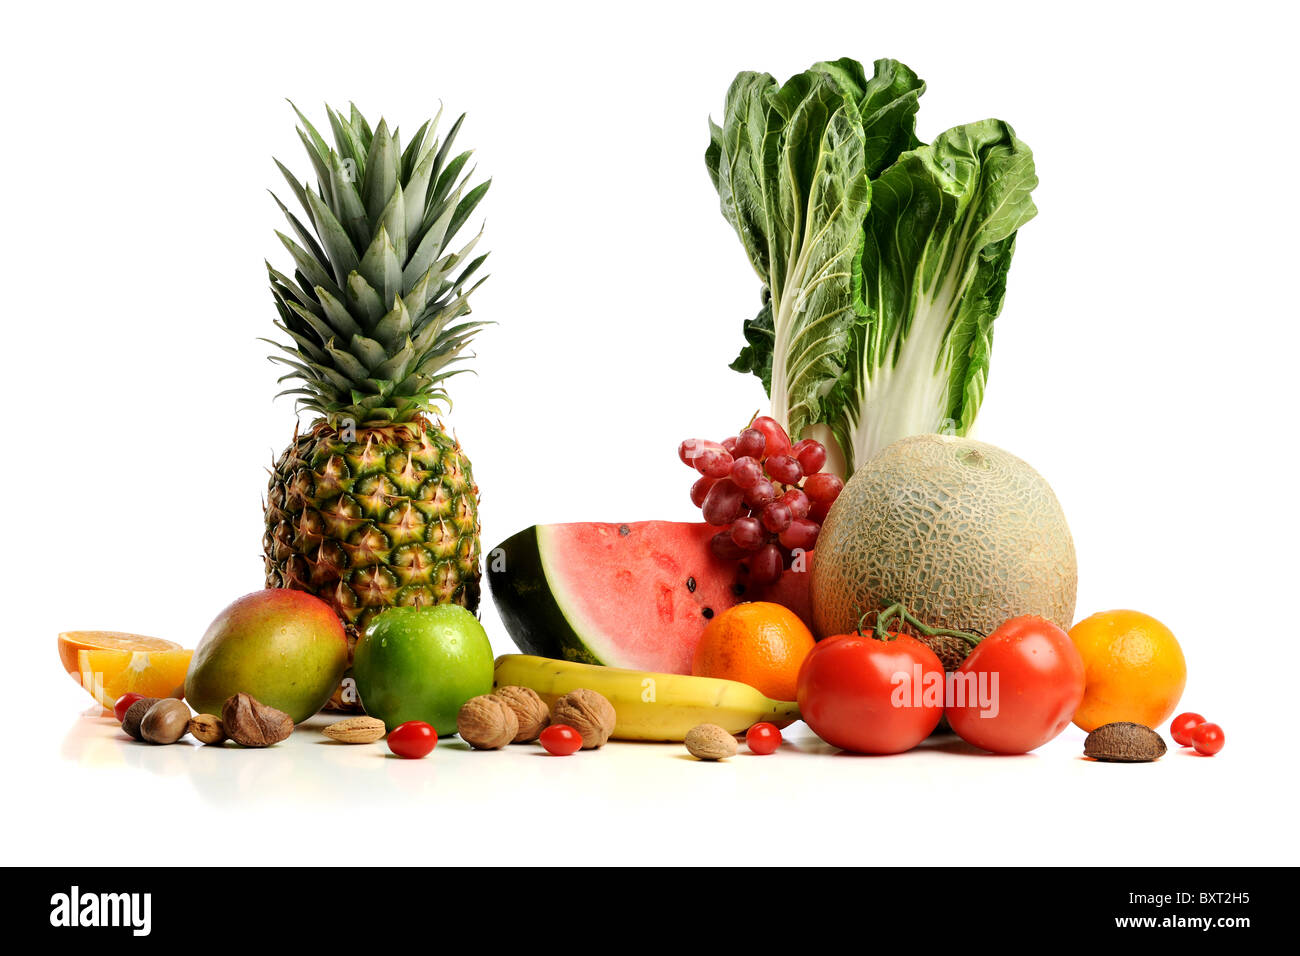 Fruits and vegetables over white background Stock Photo